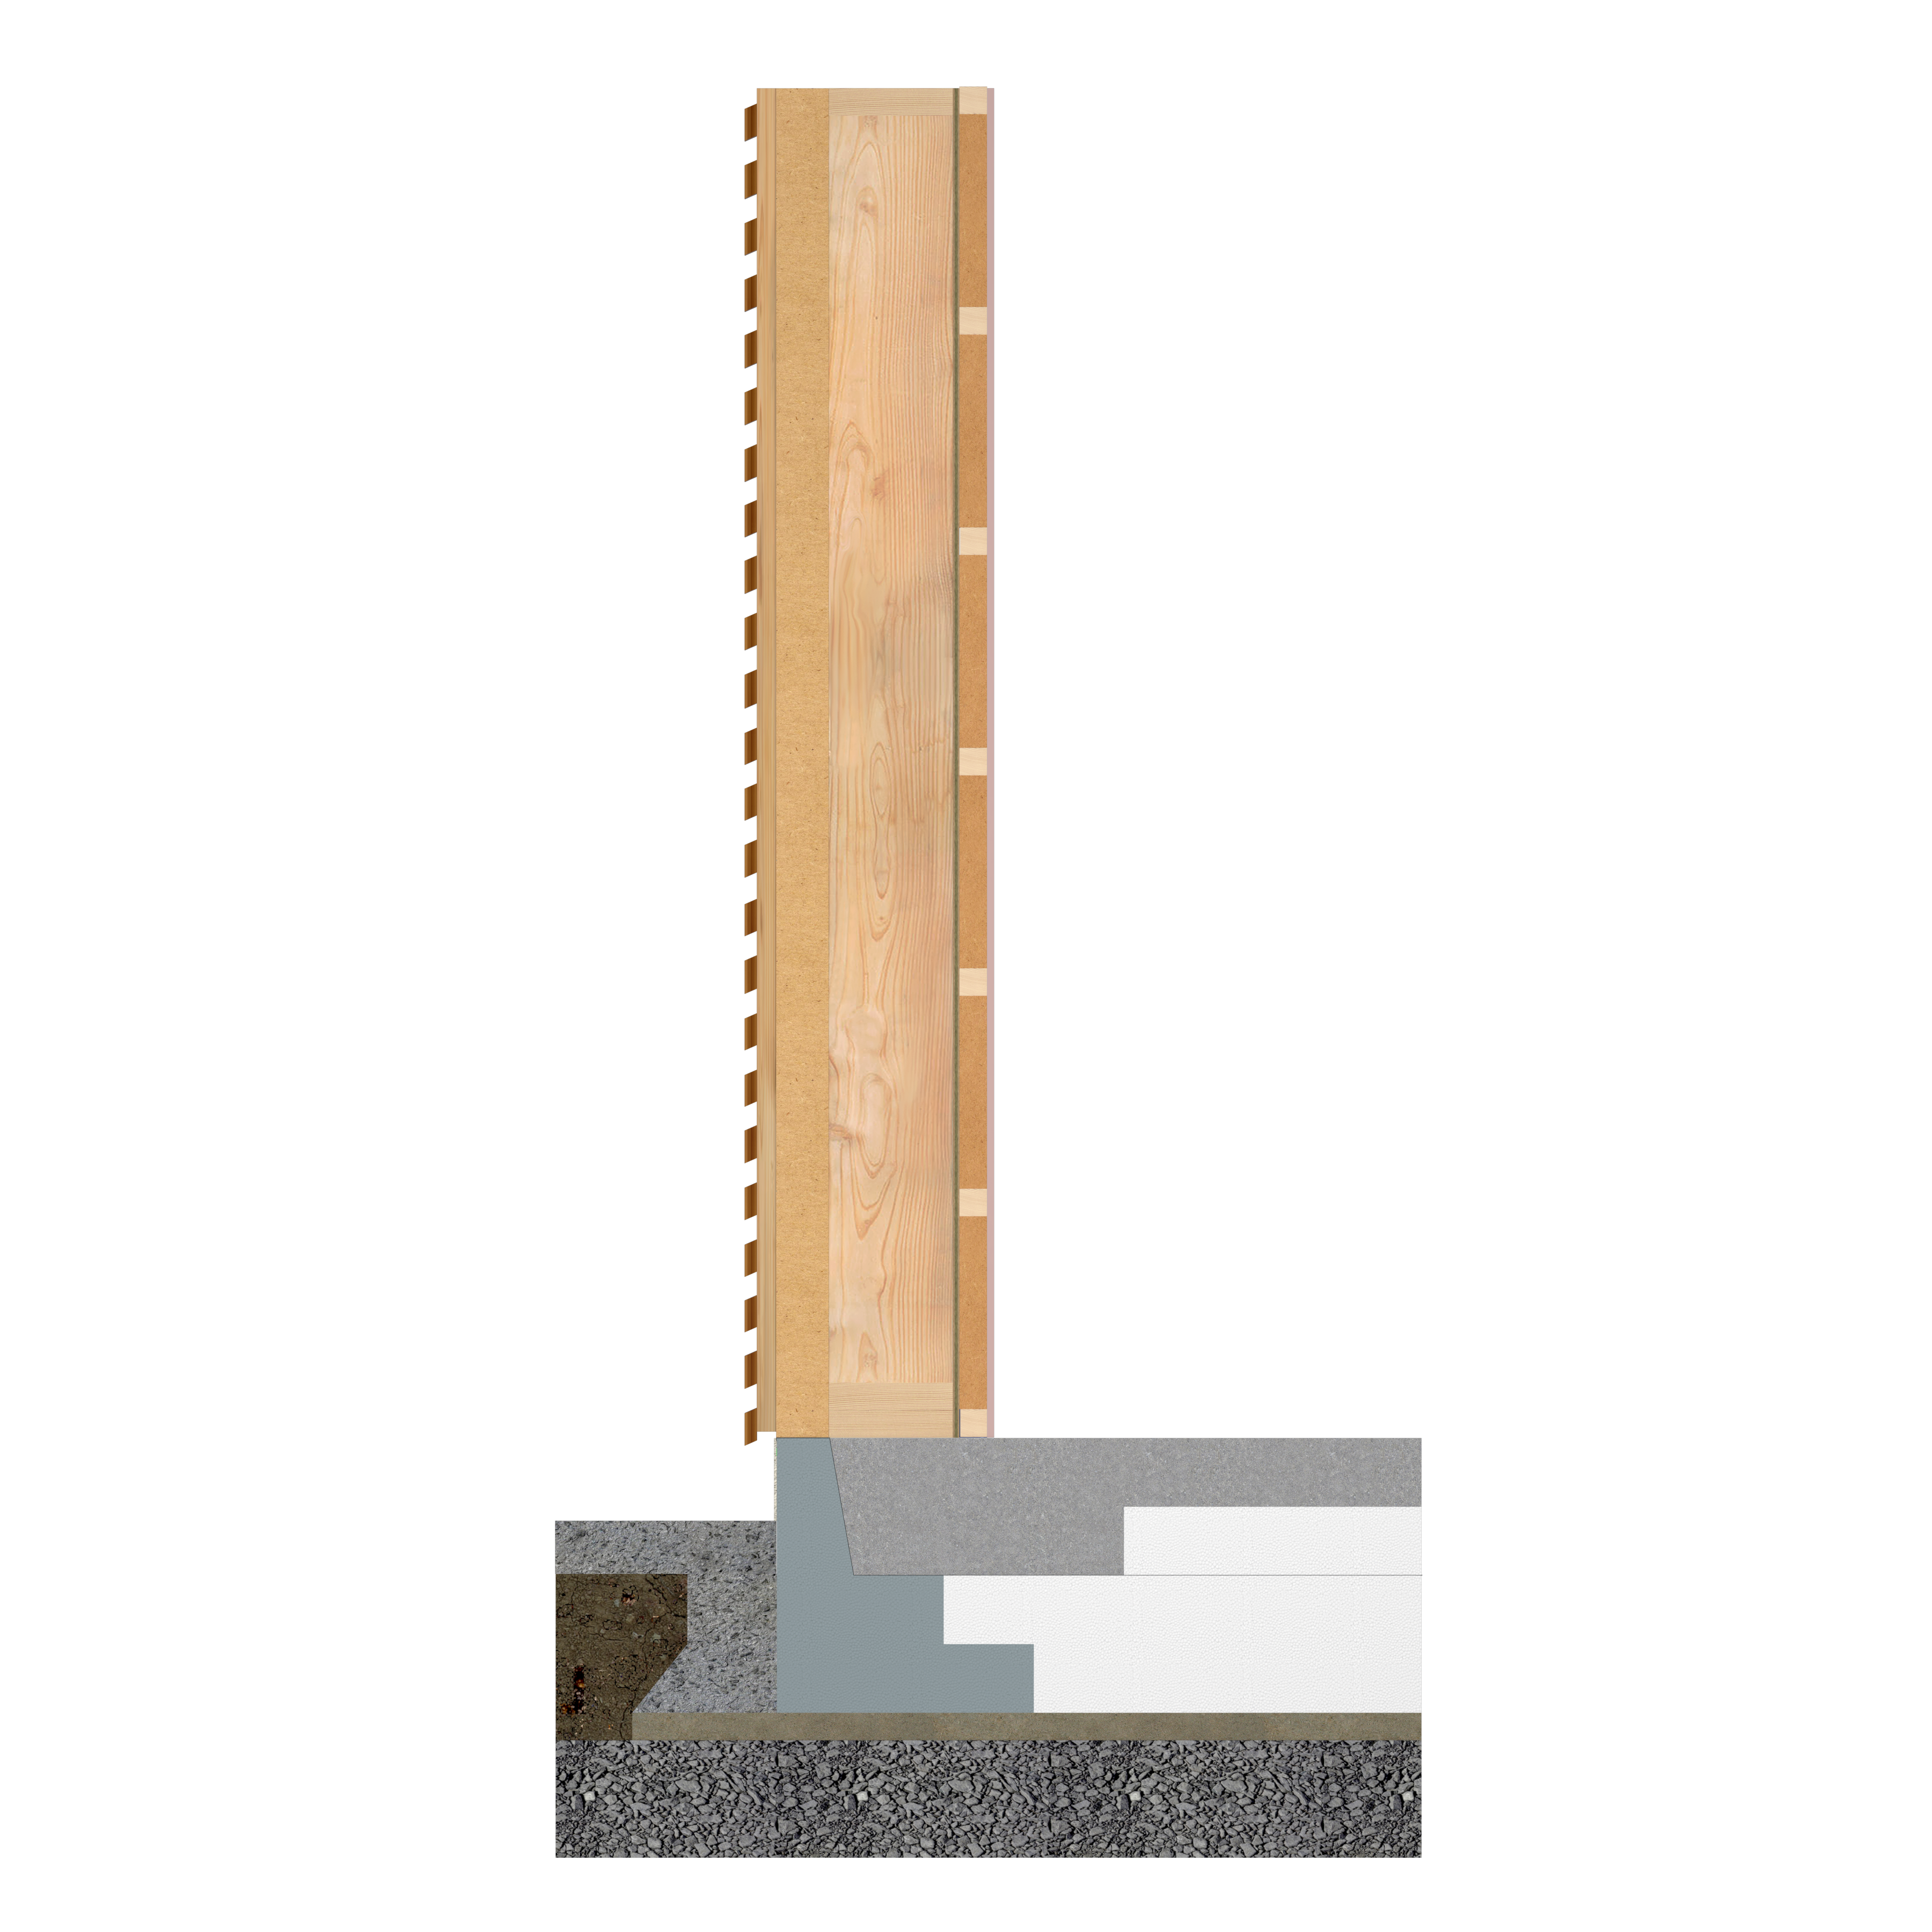 Typical Passive EcoWall Section 